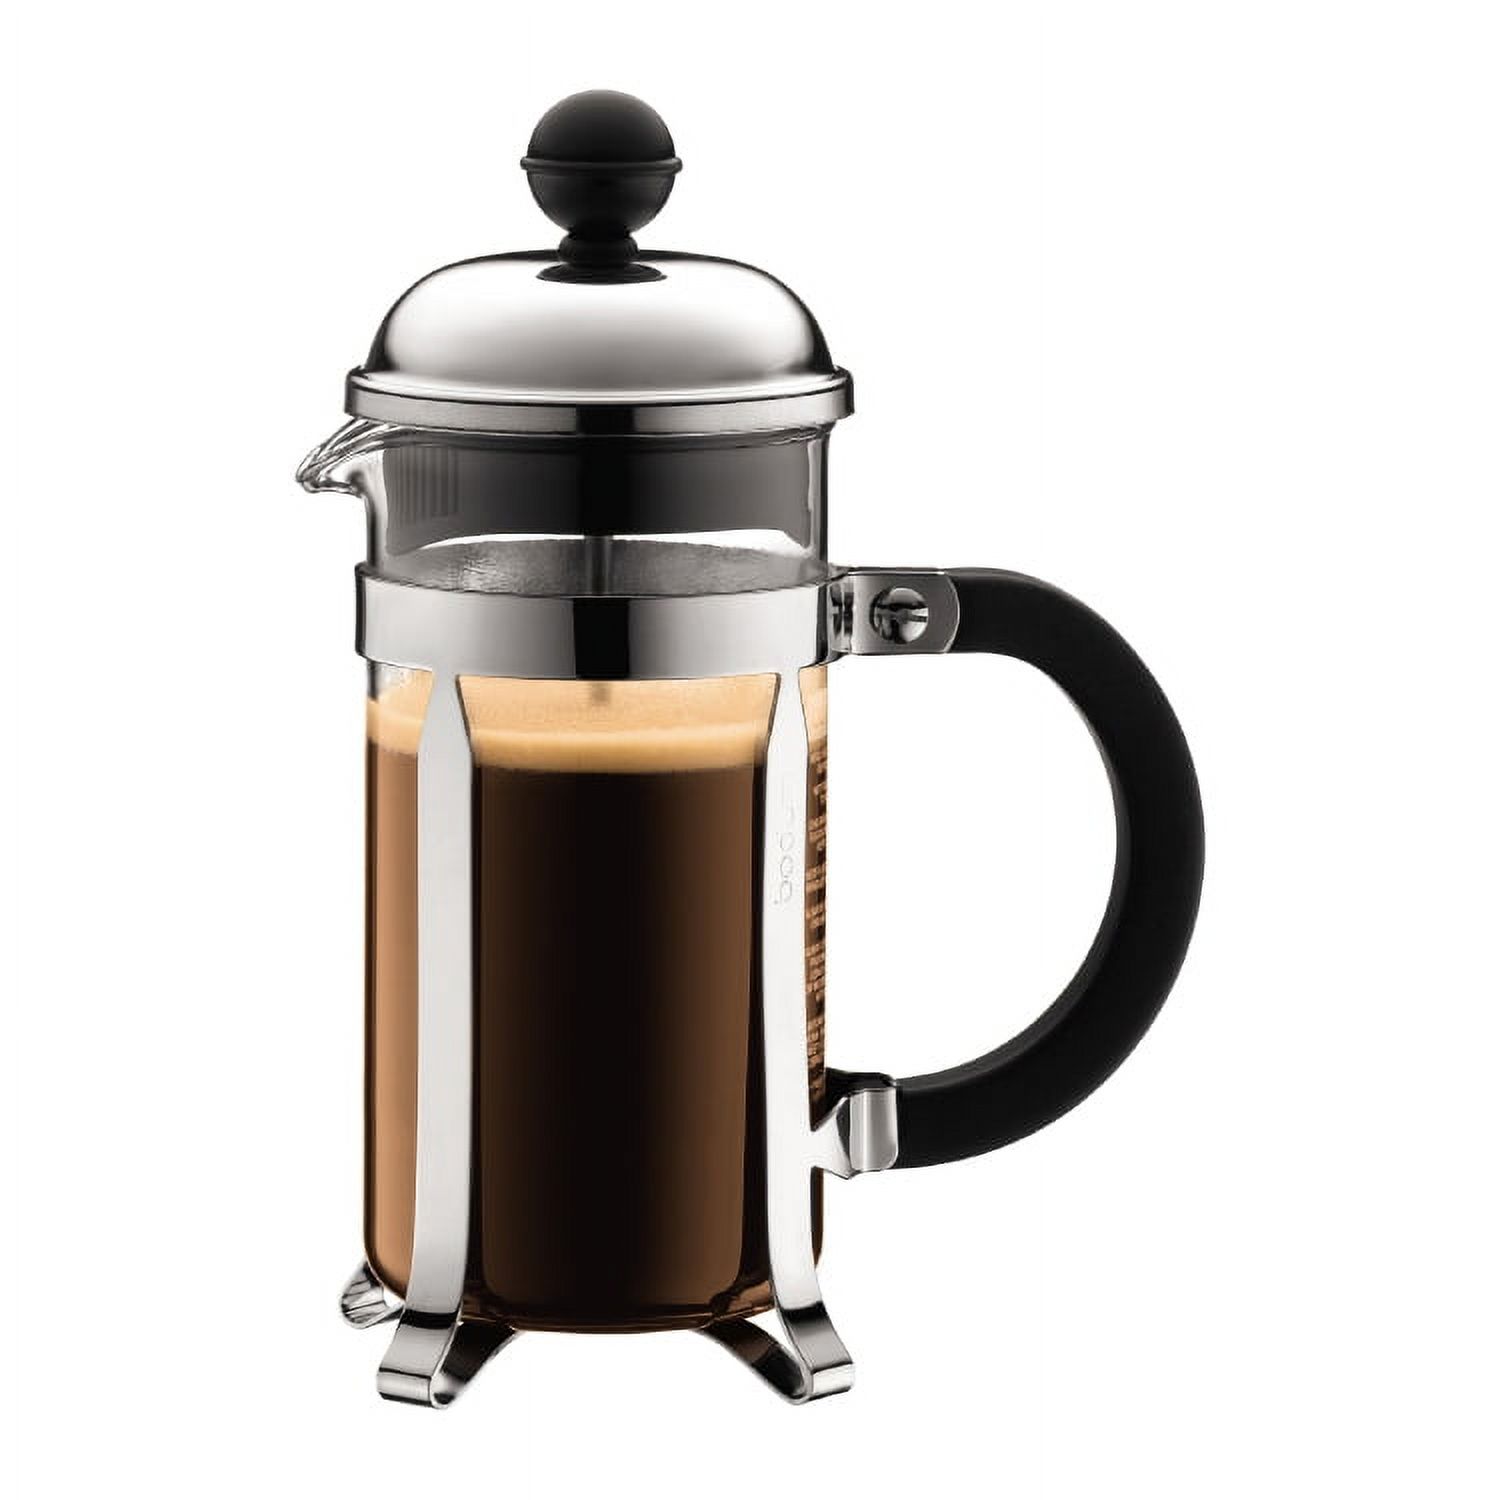 BODUM Chambord French Press Coffee Maker, 12 Ounce, Stainless Steel - image 4 of 7